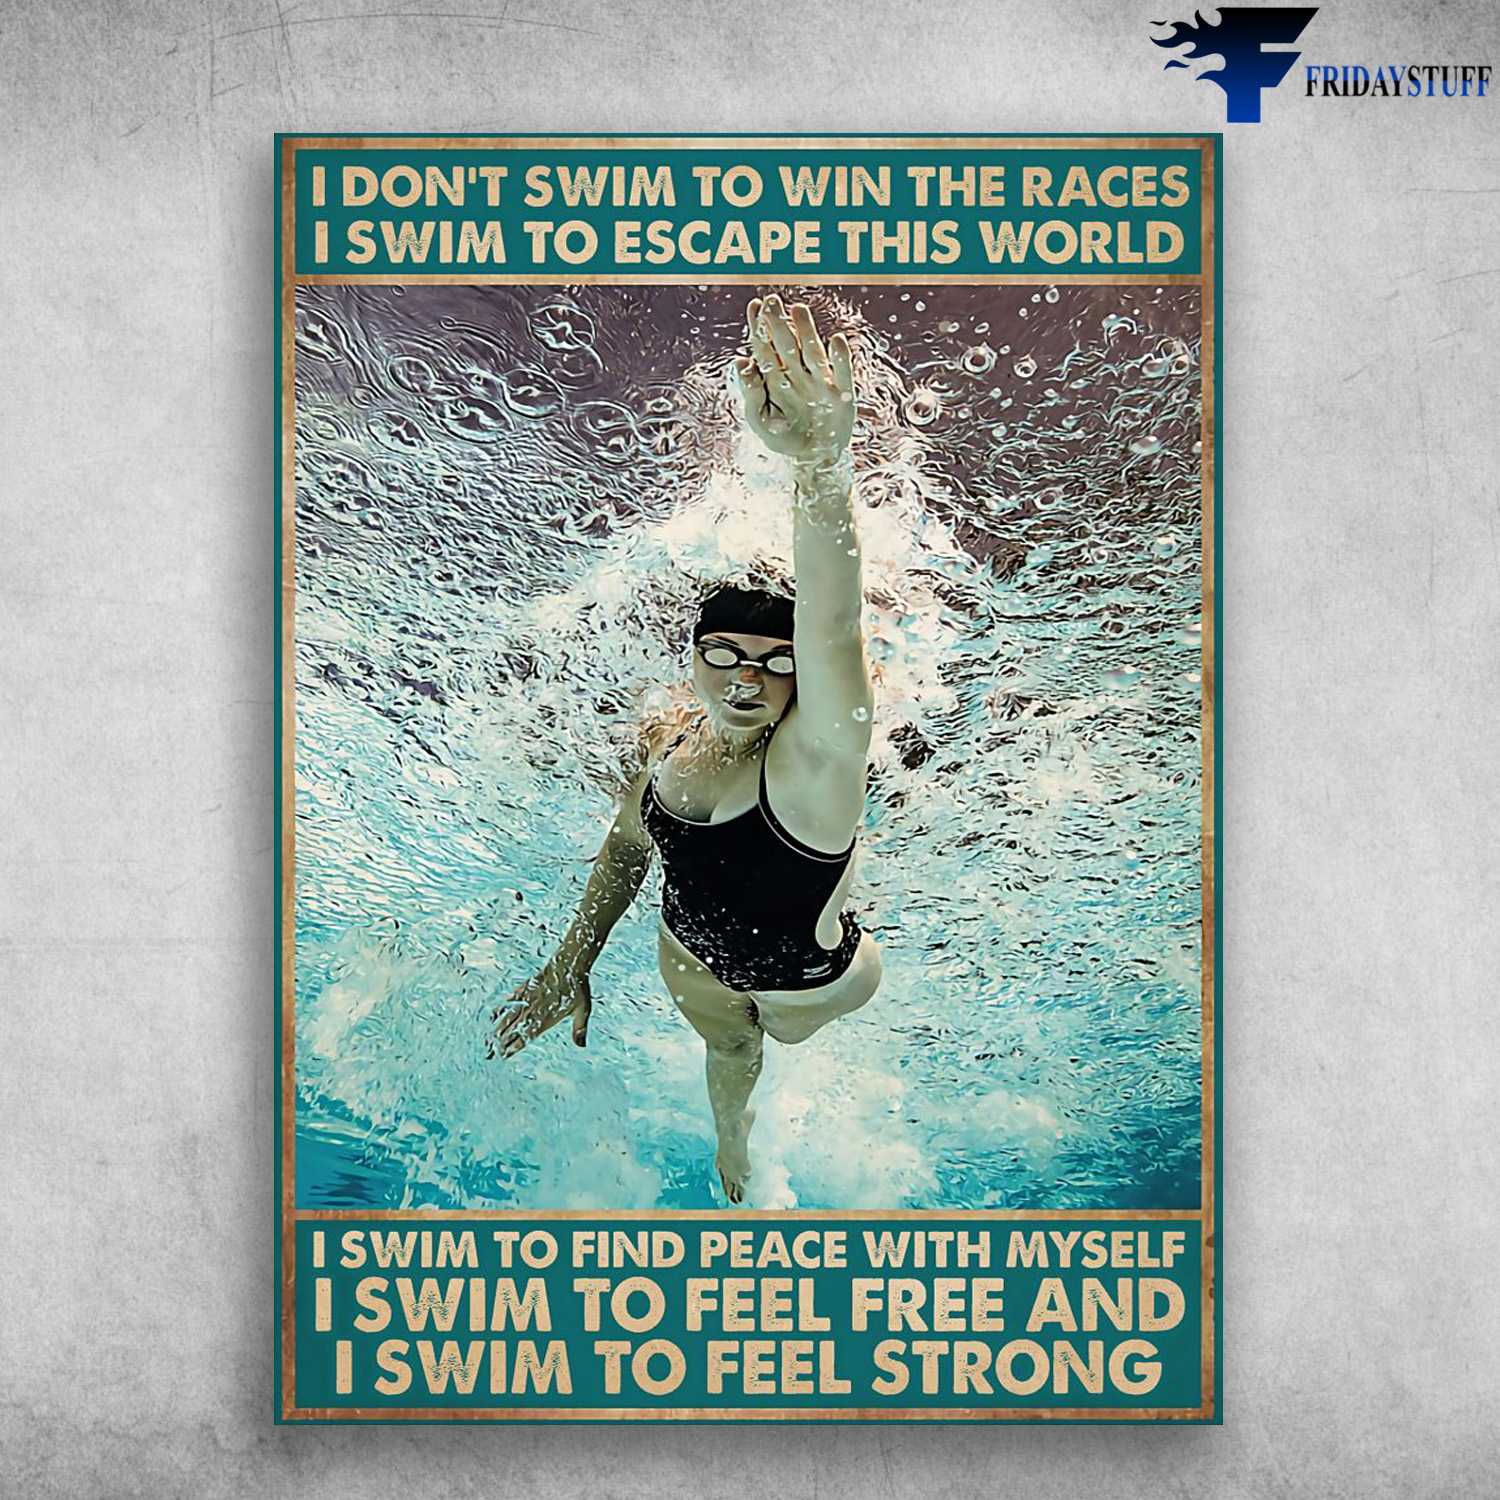 Swimming Athlete, Swimming Poster, I Don't Swim To Win The Races, I Swim To Escape This World, I Swim To Find Peace With Myself